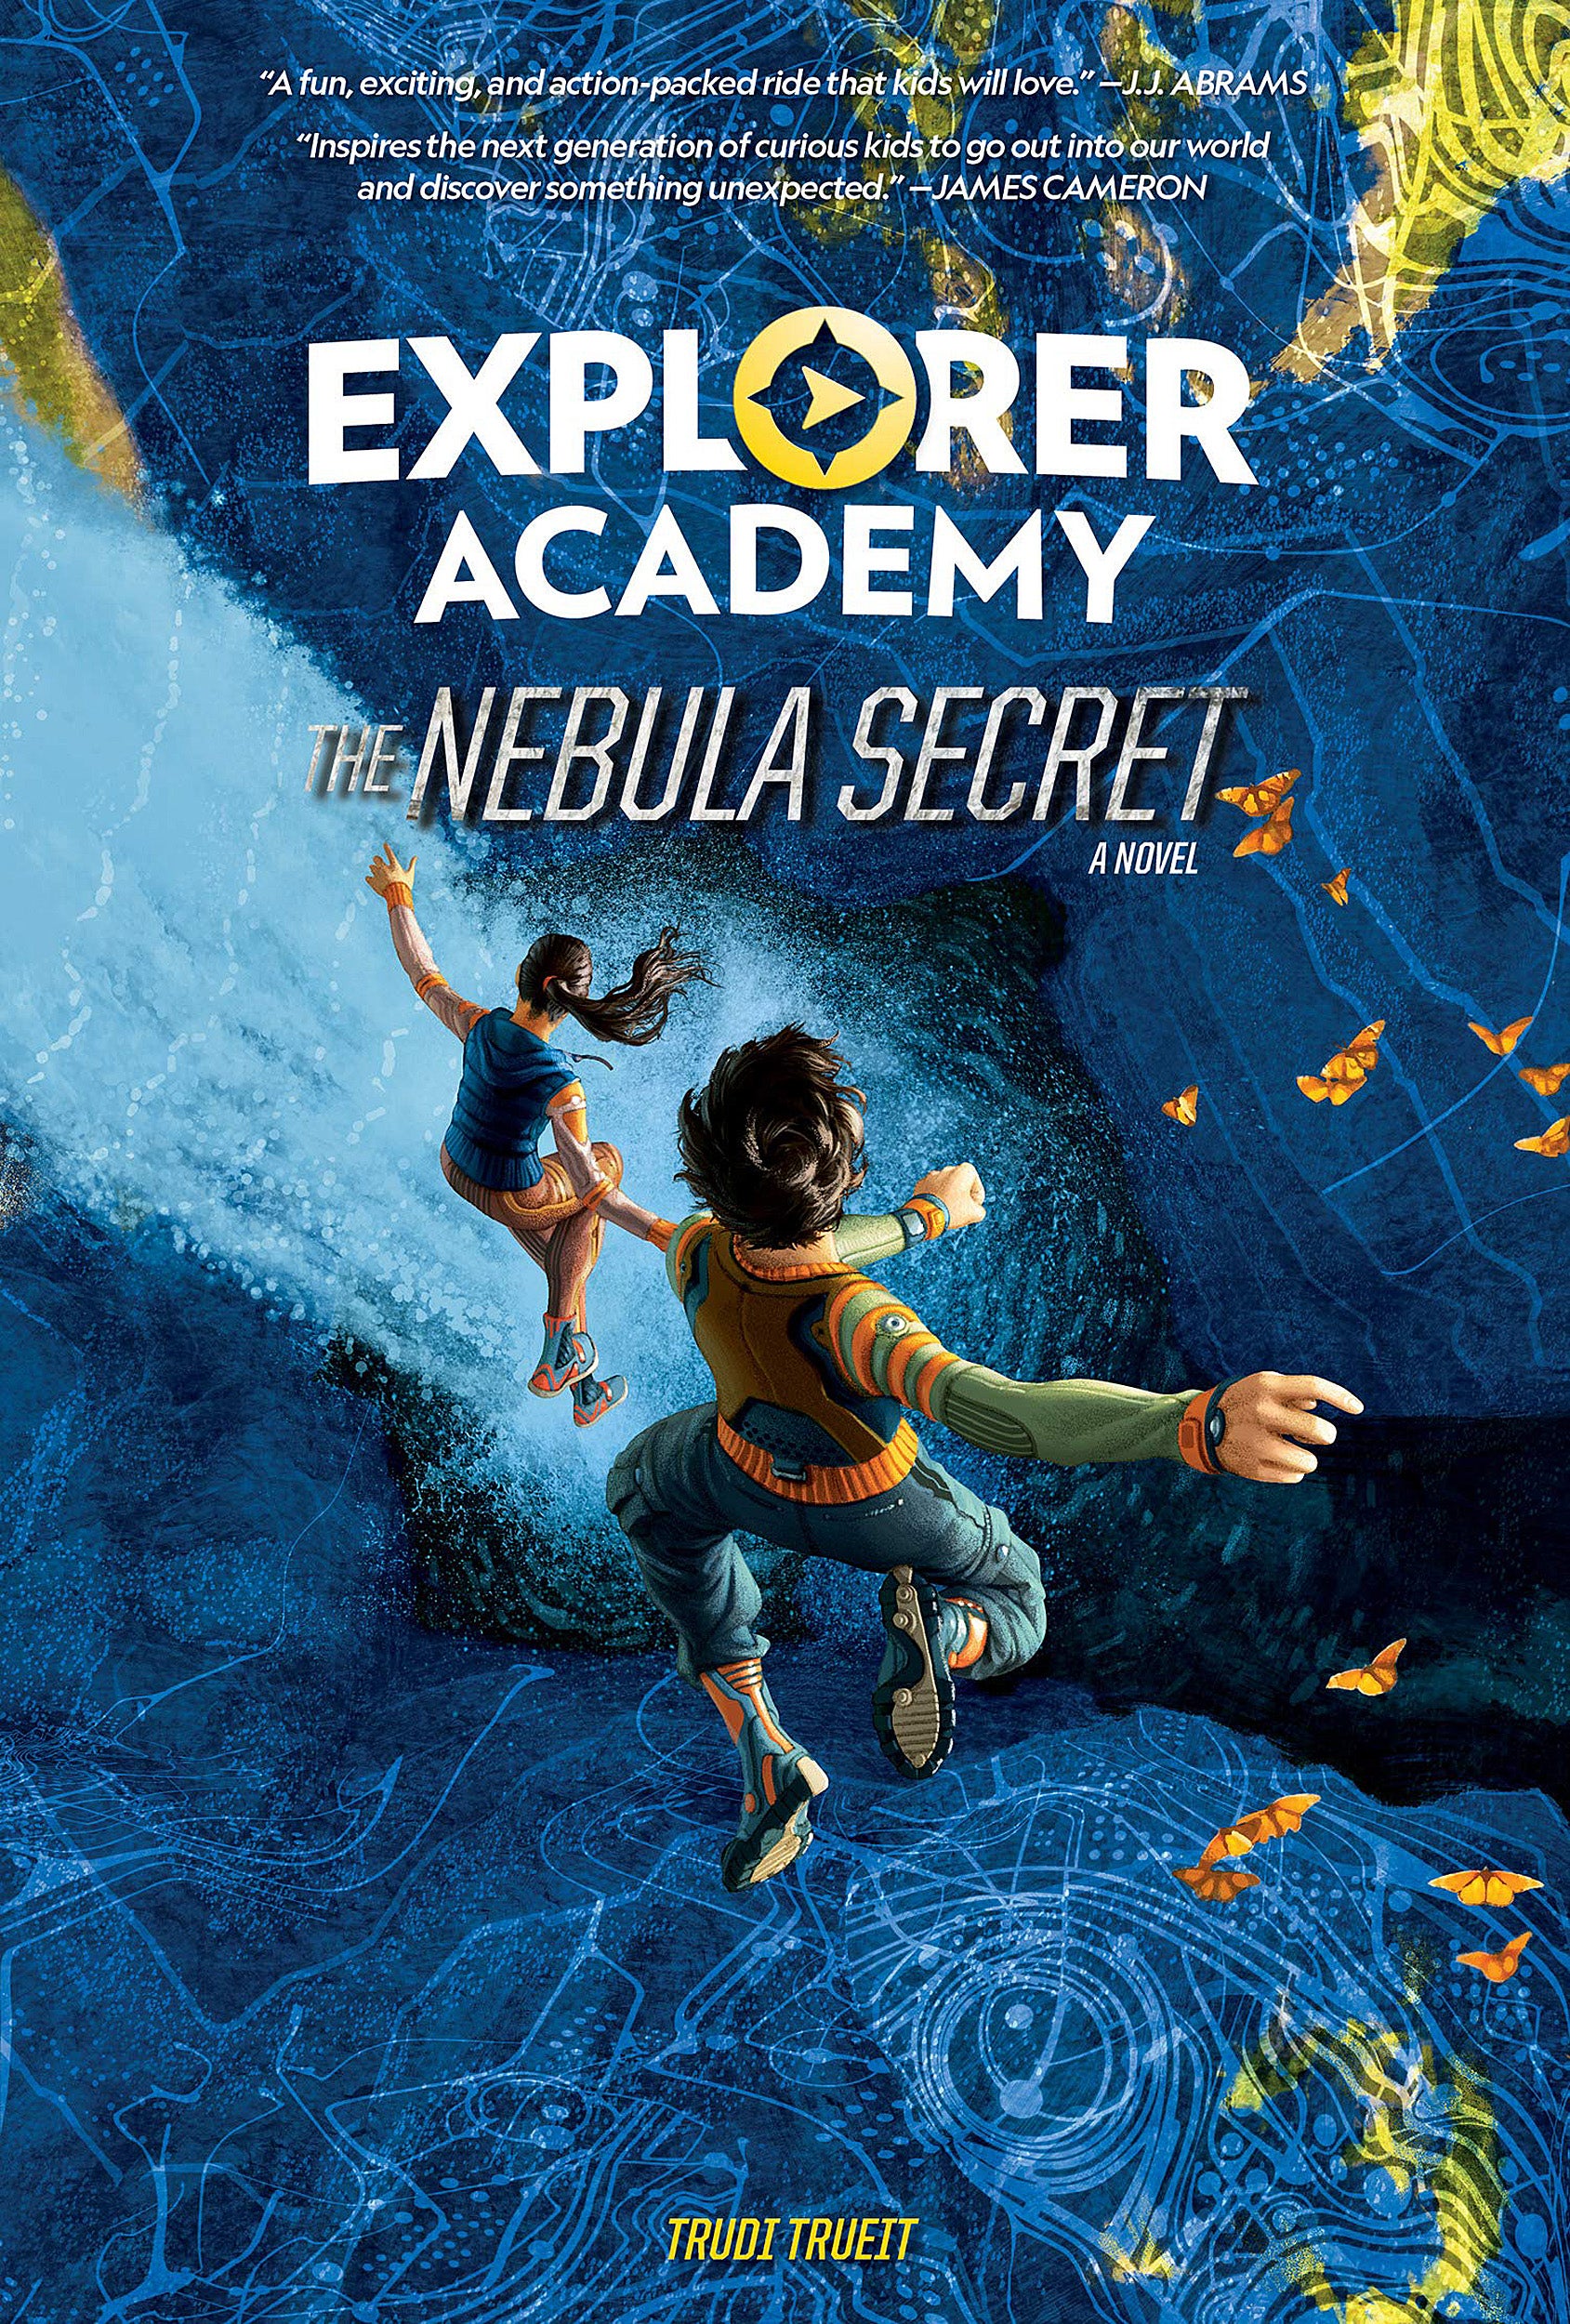 Cover: National Geographic’s “Explorer Academy” series by Trudi Trueit.